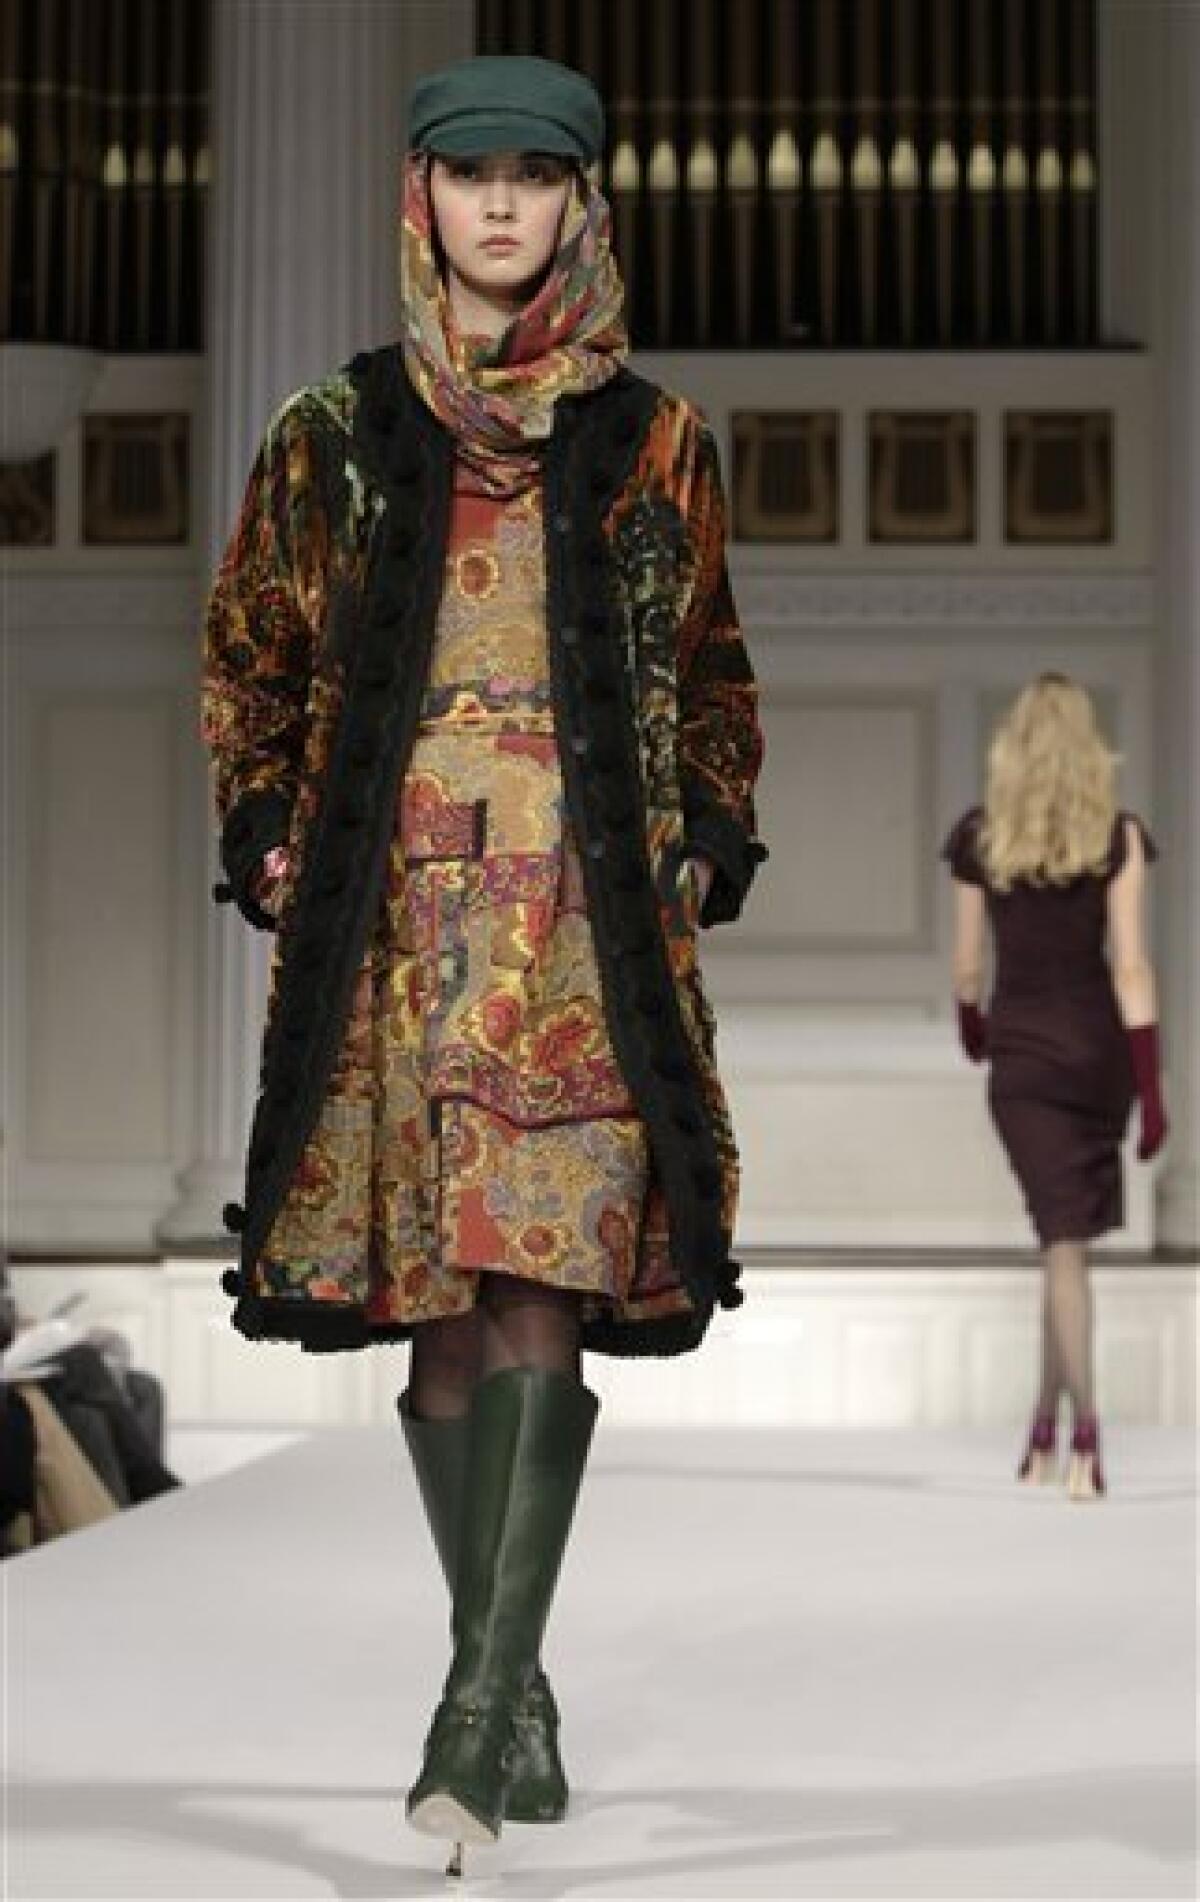 A model opens Oscar de la Renta's Fall 2011 show wearing a colorful embroidered coat during Fashion Week in New York, Wednesday, Feb. 16, 2011. (AP Photo/Kathy Willens)